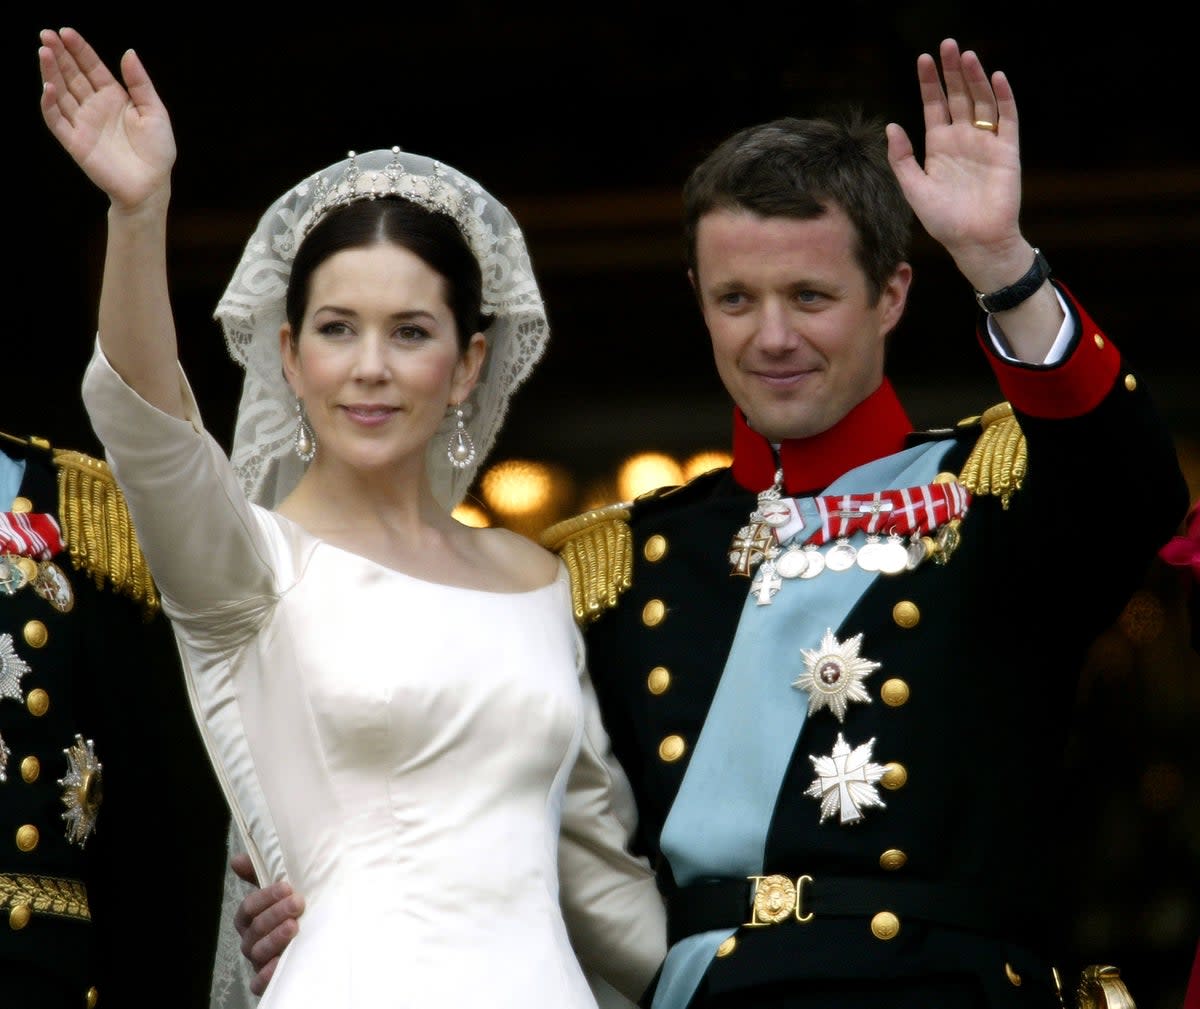 Crown Princess Mary and Crown Prince Frederik of Denmark wave from the balcony of Christian VII’s Palace after their wedding on 14 May 2004 in Copenhagen, Denmark (Getty Images)